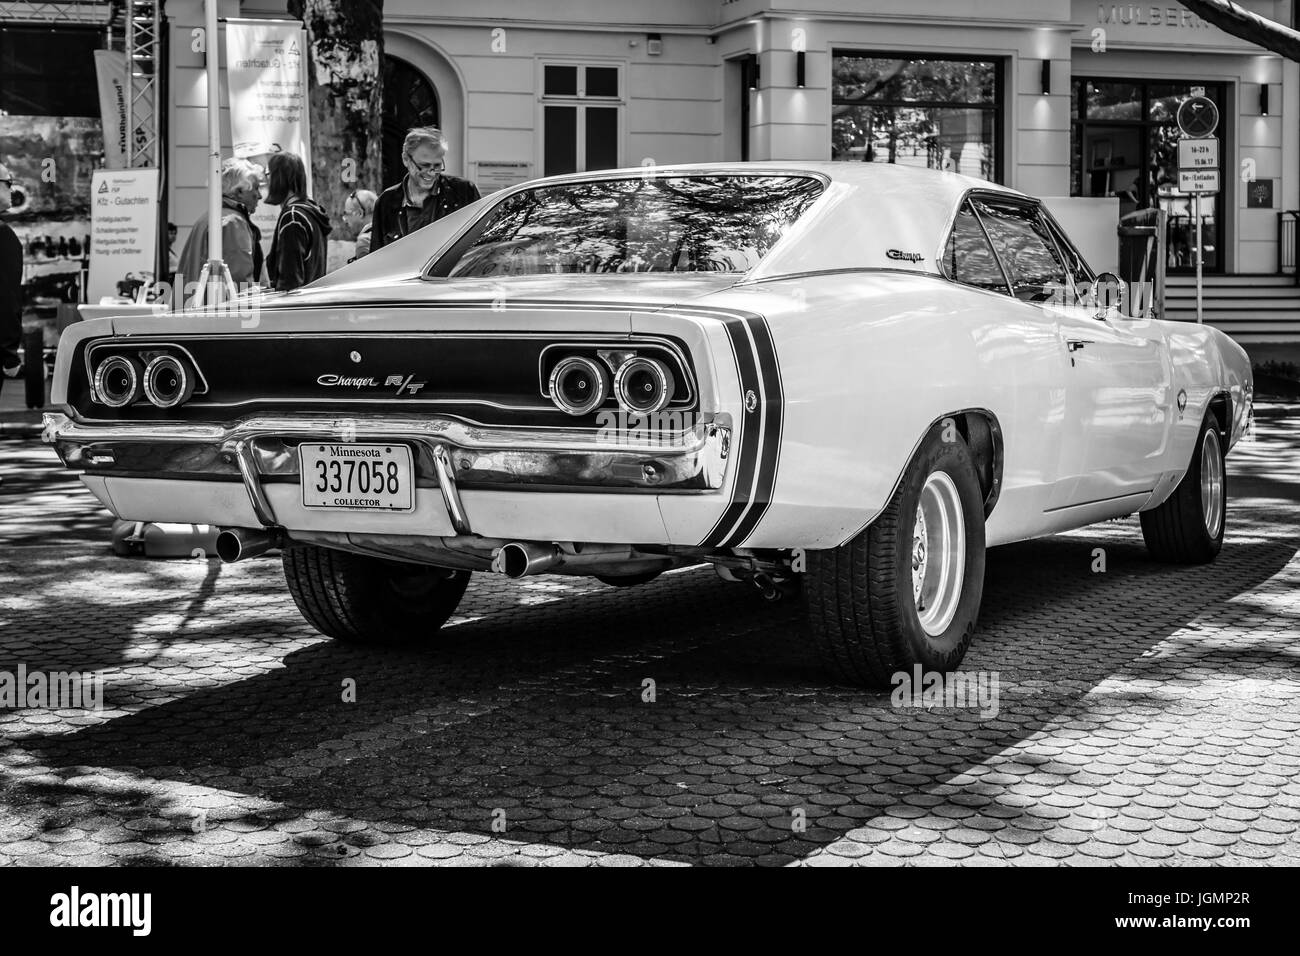 BERLIN - JUNE 17, 2017: Mid-size car Dodge Charger R/T, 1968. Rear view. Black and white. Classic Days Berlin 2017. Stock Photo